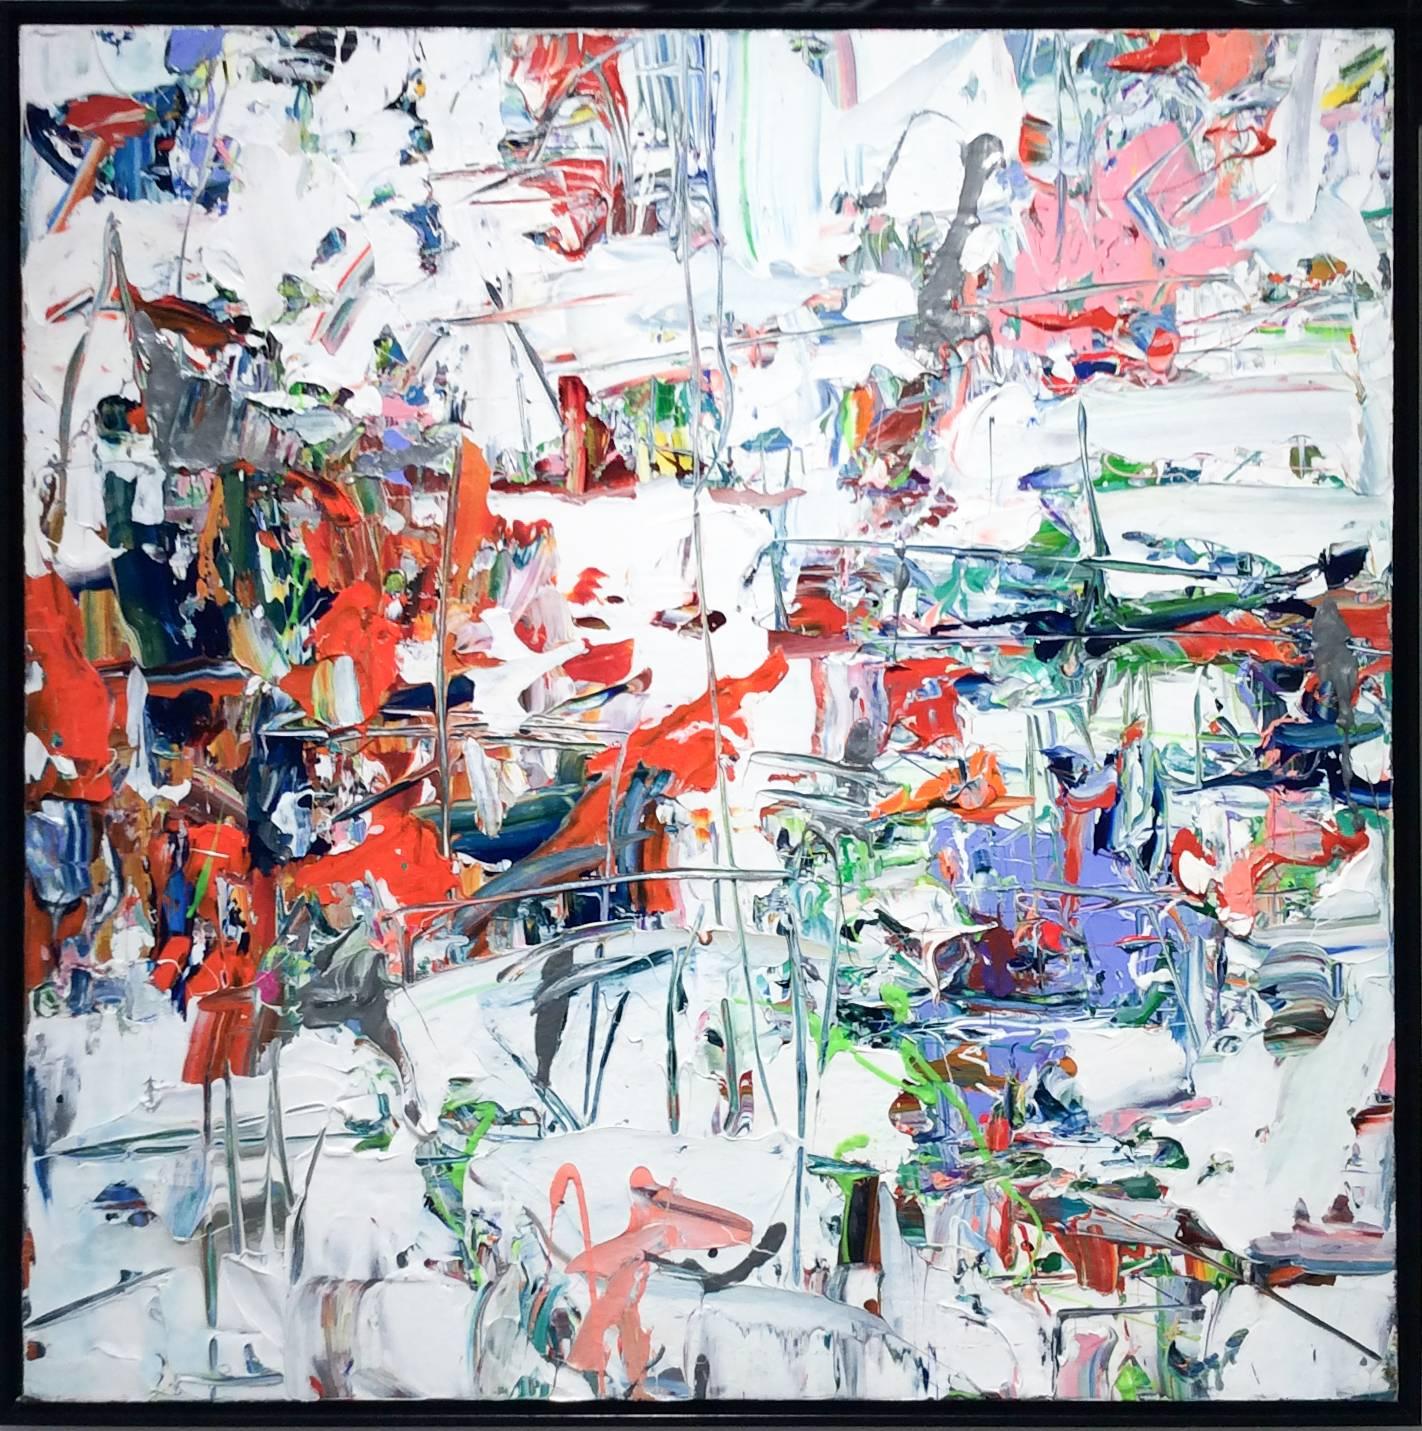 Adam Cohen Abstract Painting - Dissonance (Contemporary Abstract Expressionist Painting in Red, White & Blue)